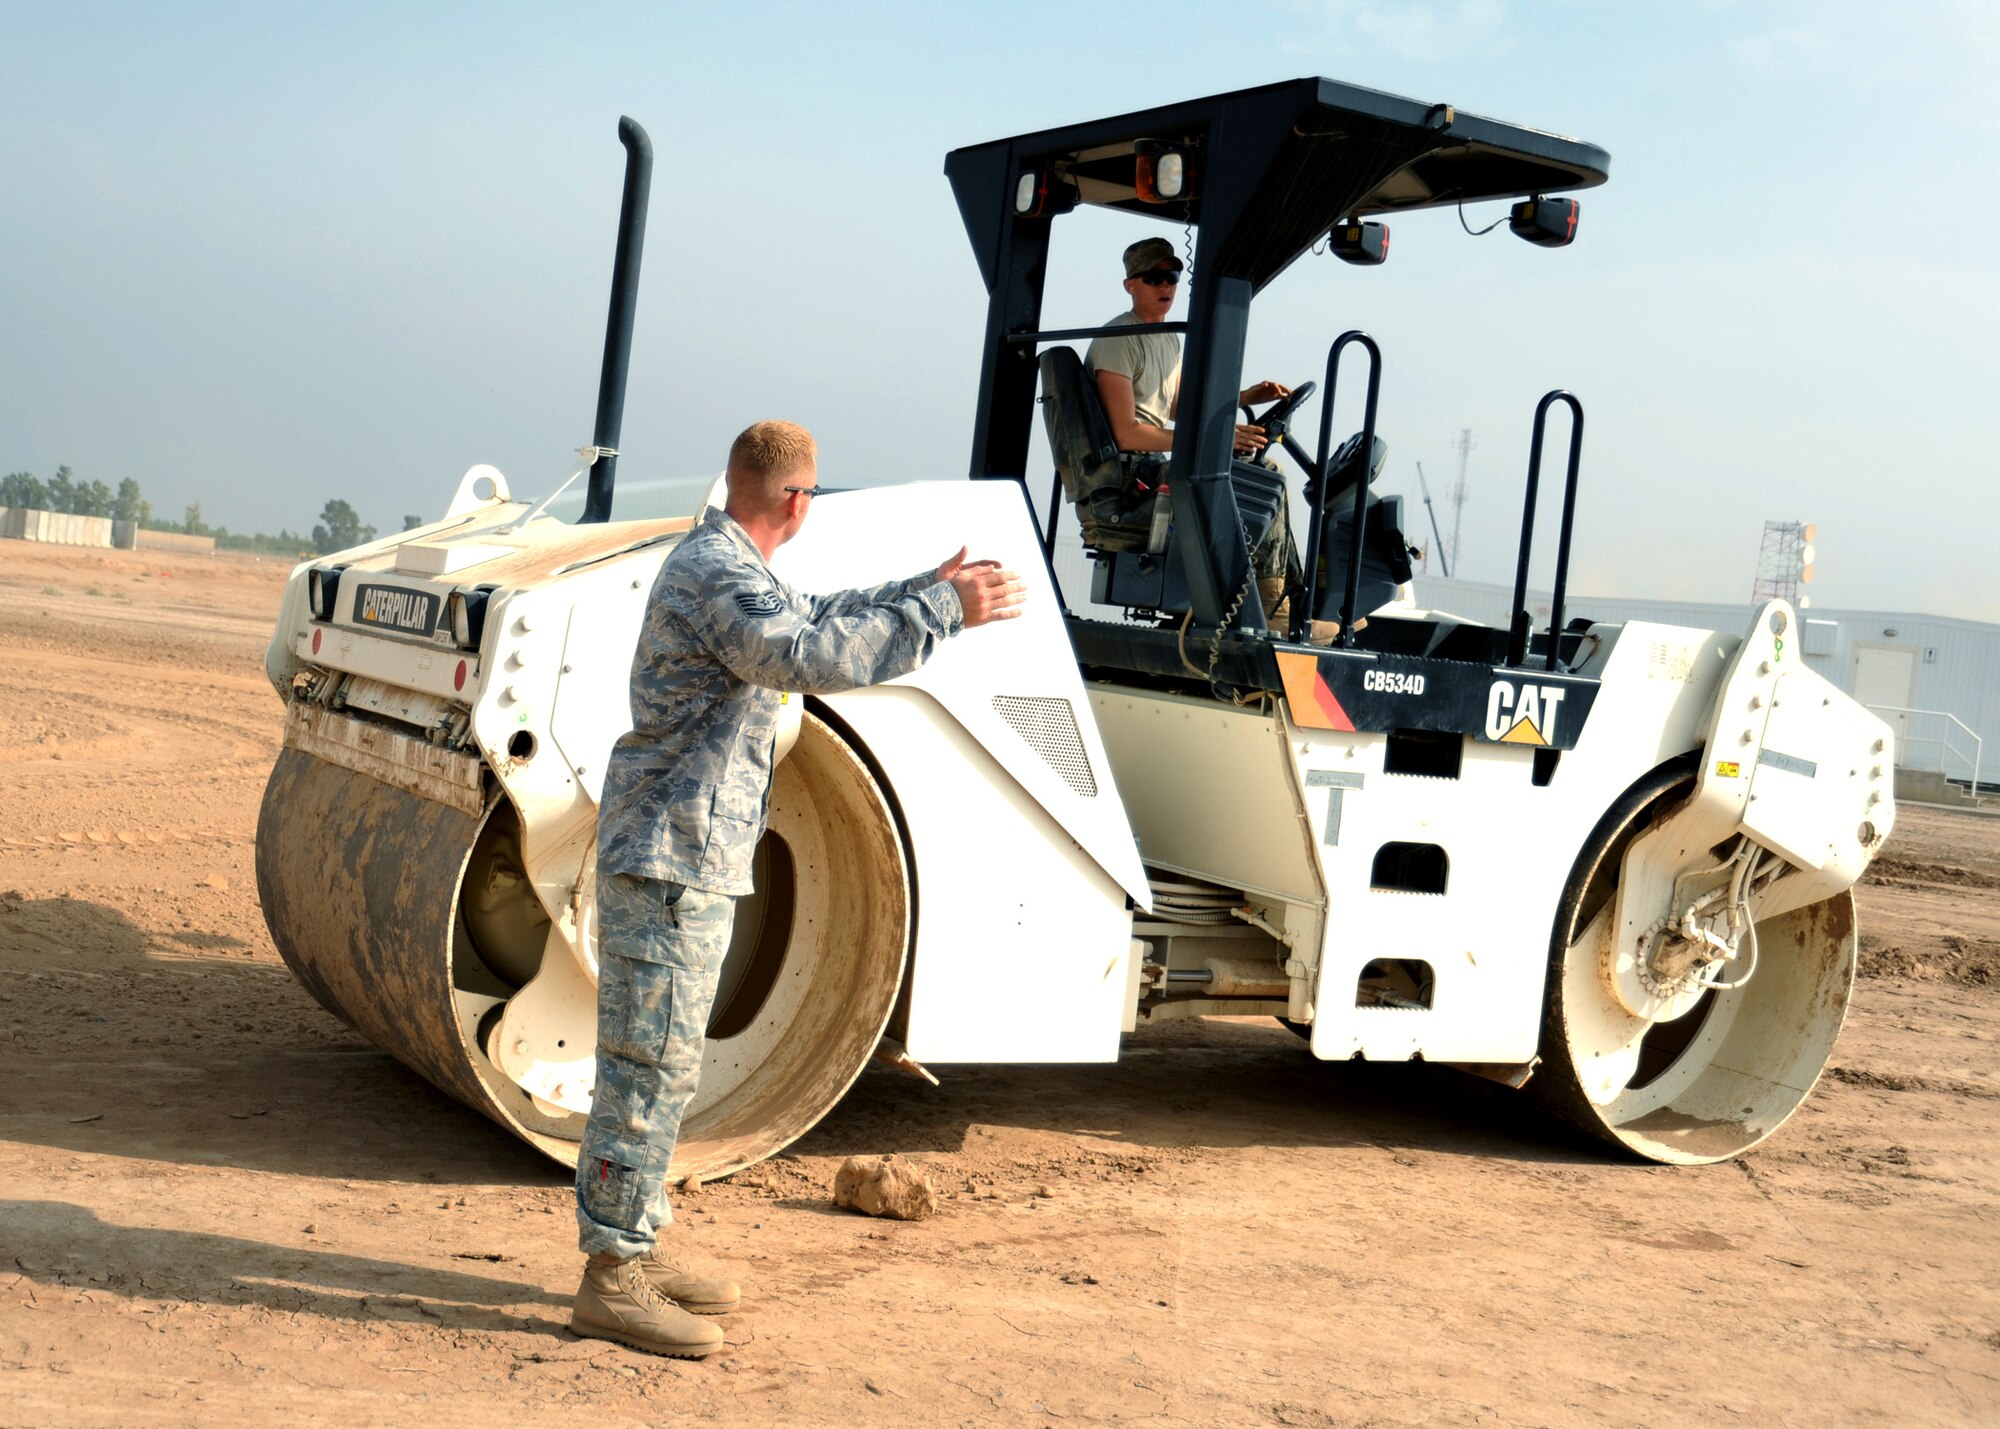 JOINT BASE BALAD, Iraq -- Tech. Sgt. Orlin Rohde, 732nd Expeditionary Civil Engineer Squadron heavy equipment operator and project manager, directs Airman Marshall Hess as he drives a vibratory roller to prepare the grounds for a new container repair yard Nov. 2, 2009. By using containers repaired here instead of purchasing new ones, the projected savings total more than $100 million as military assets withdraw from Iraq. (U.S. Air Force photo/Senior Airman Christopher Hubenthal)